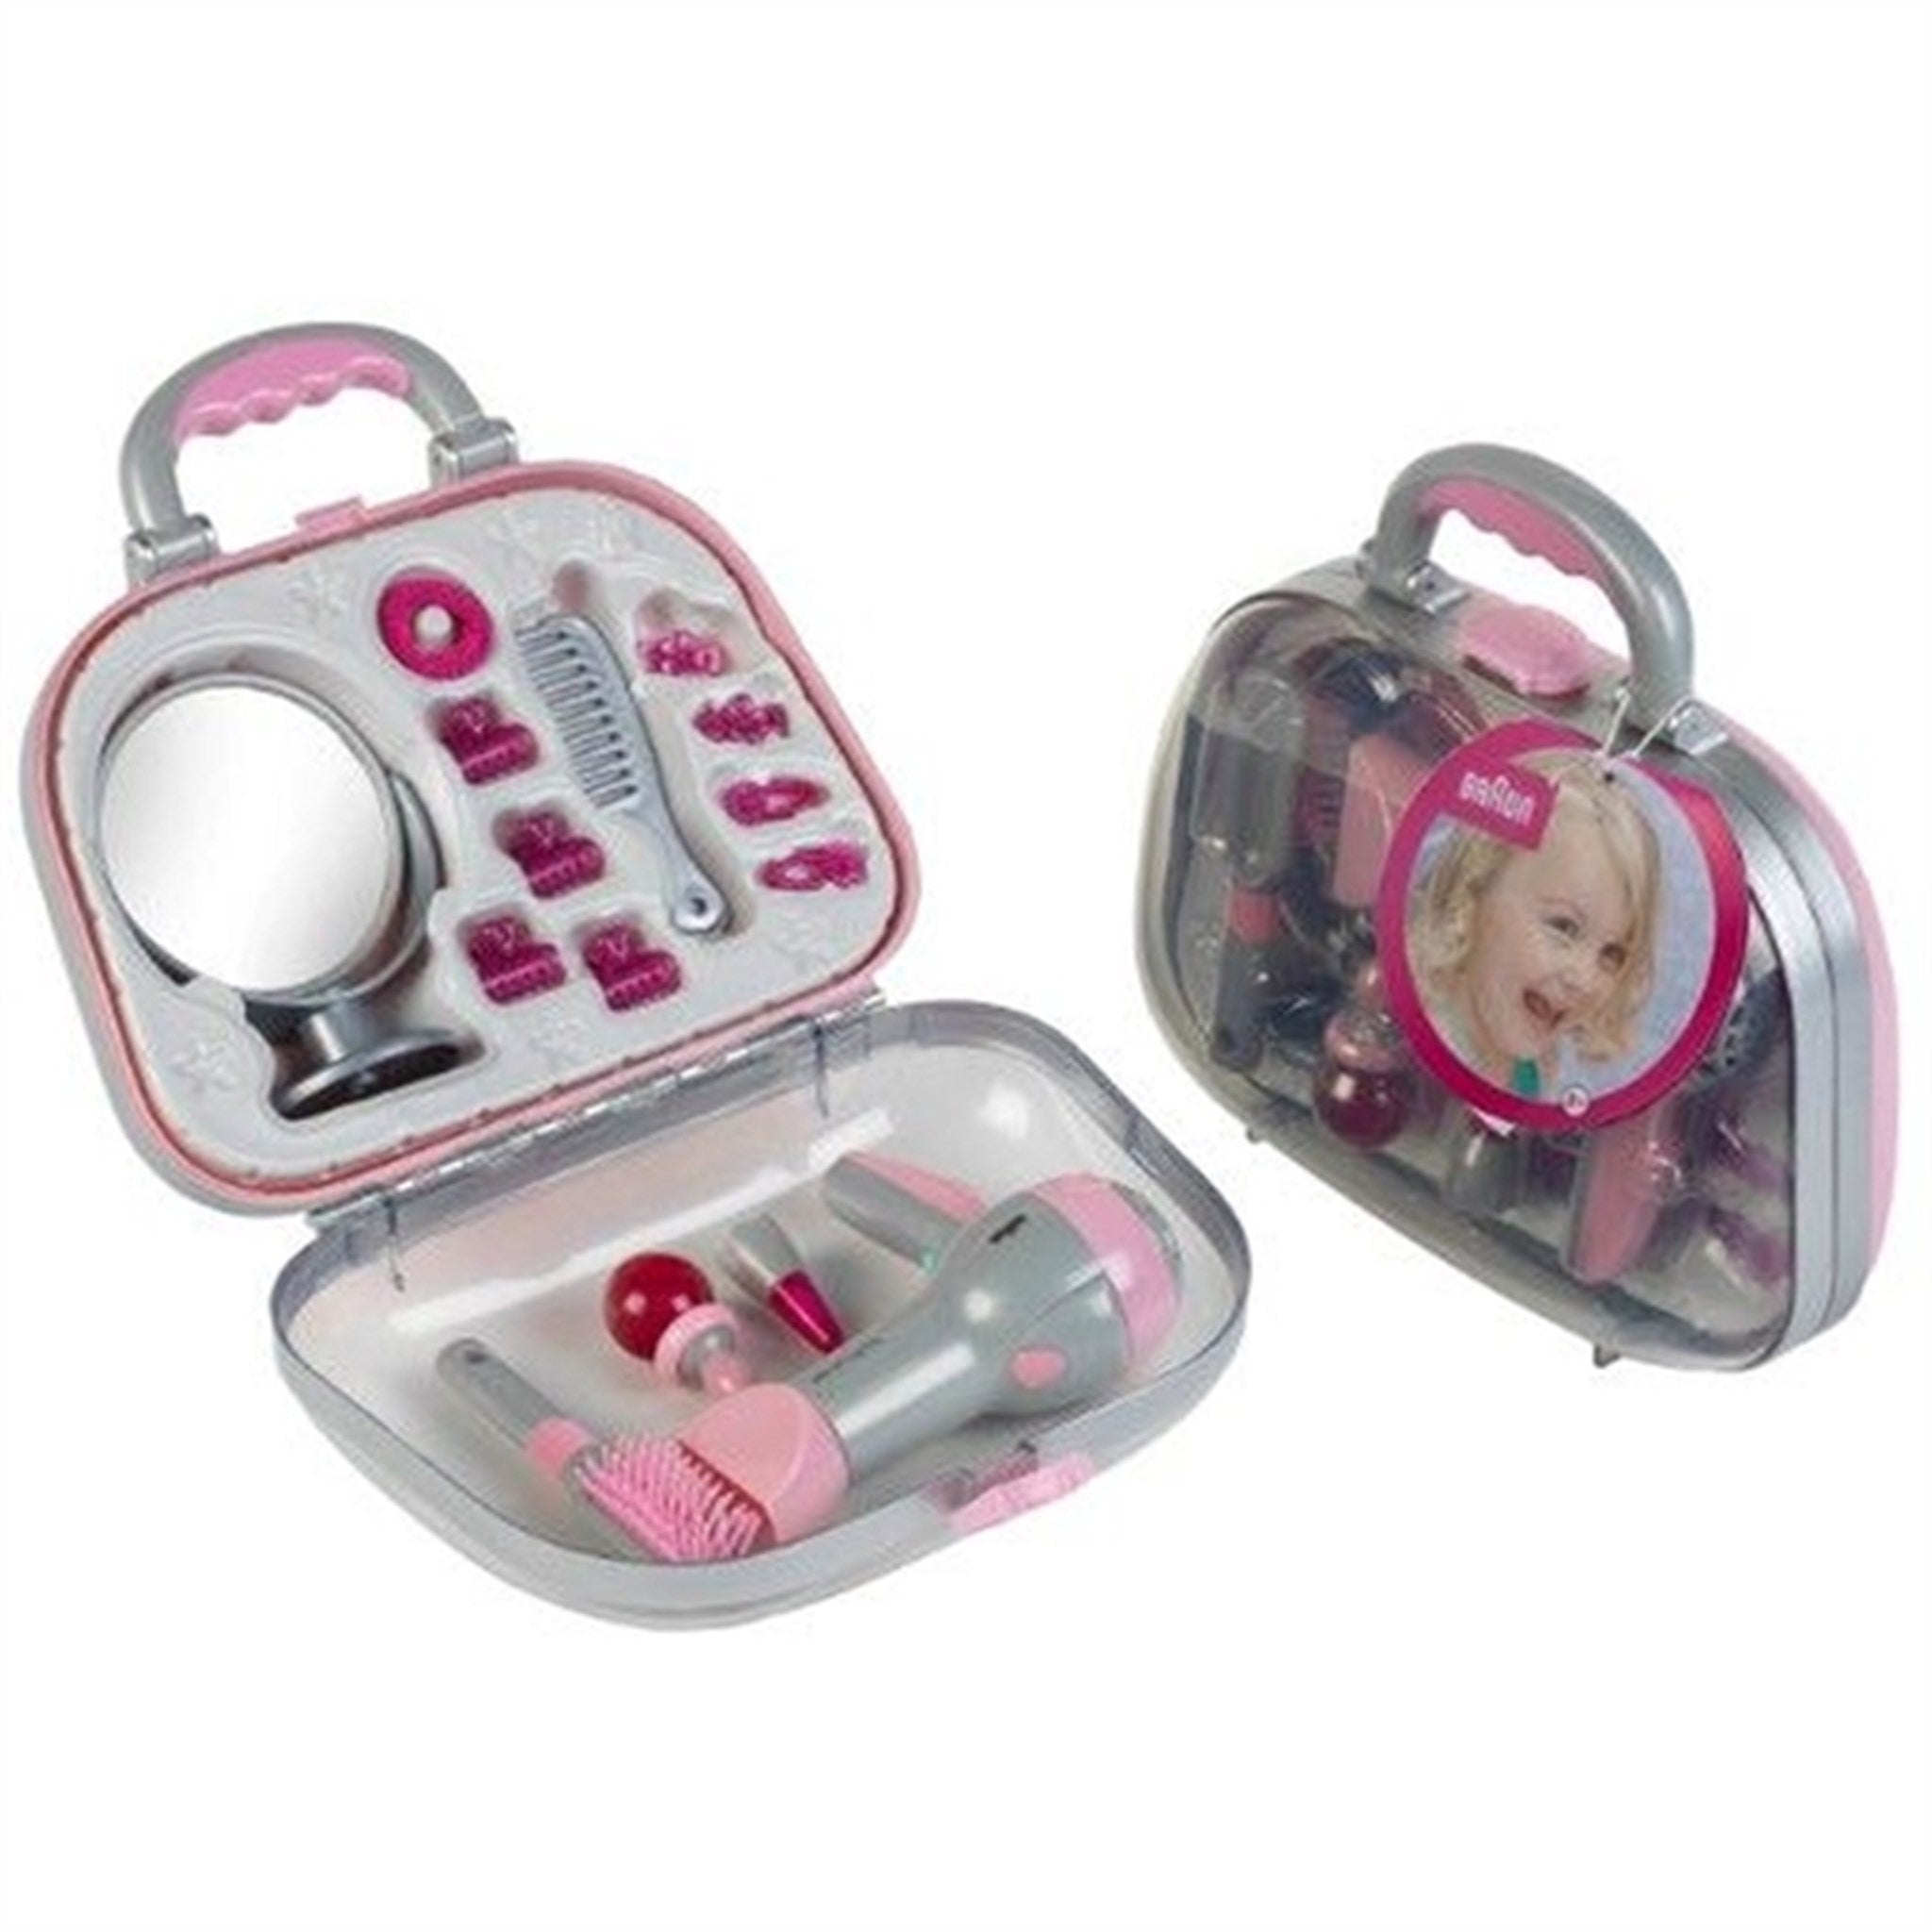 Braun Beauty Set in a Suitcase